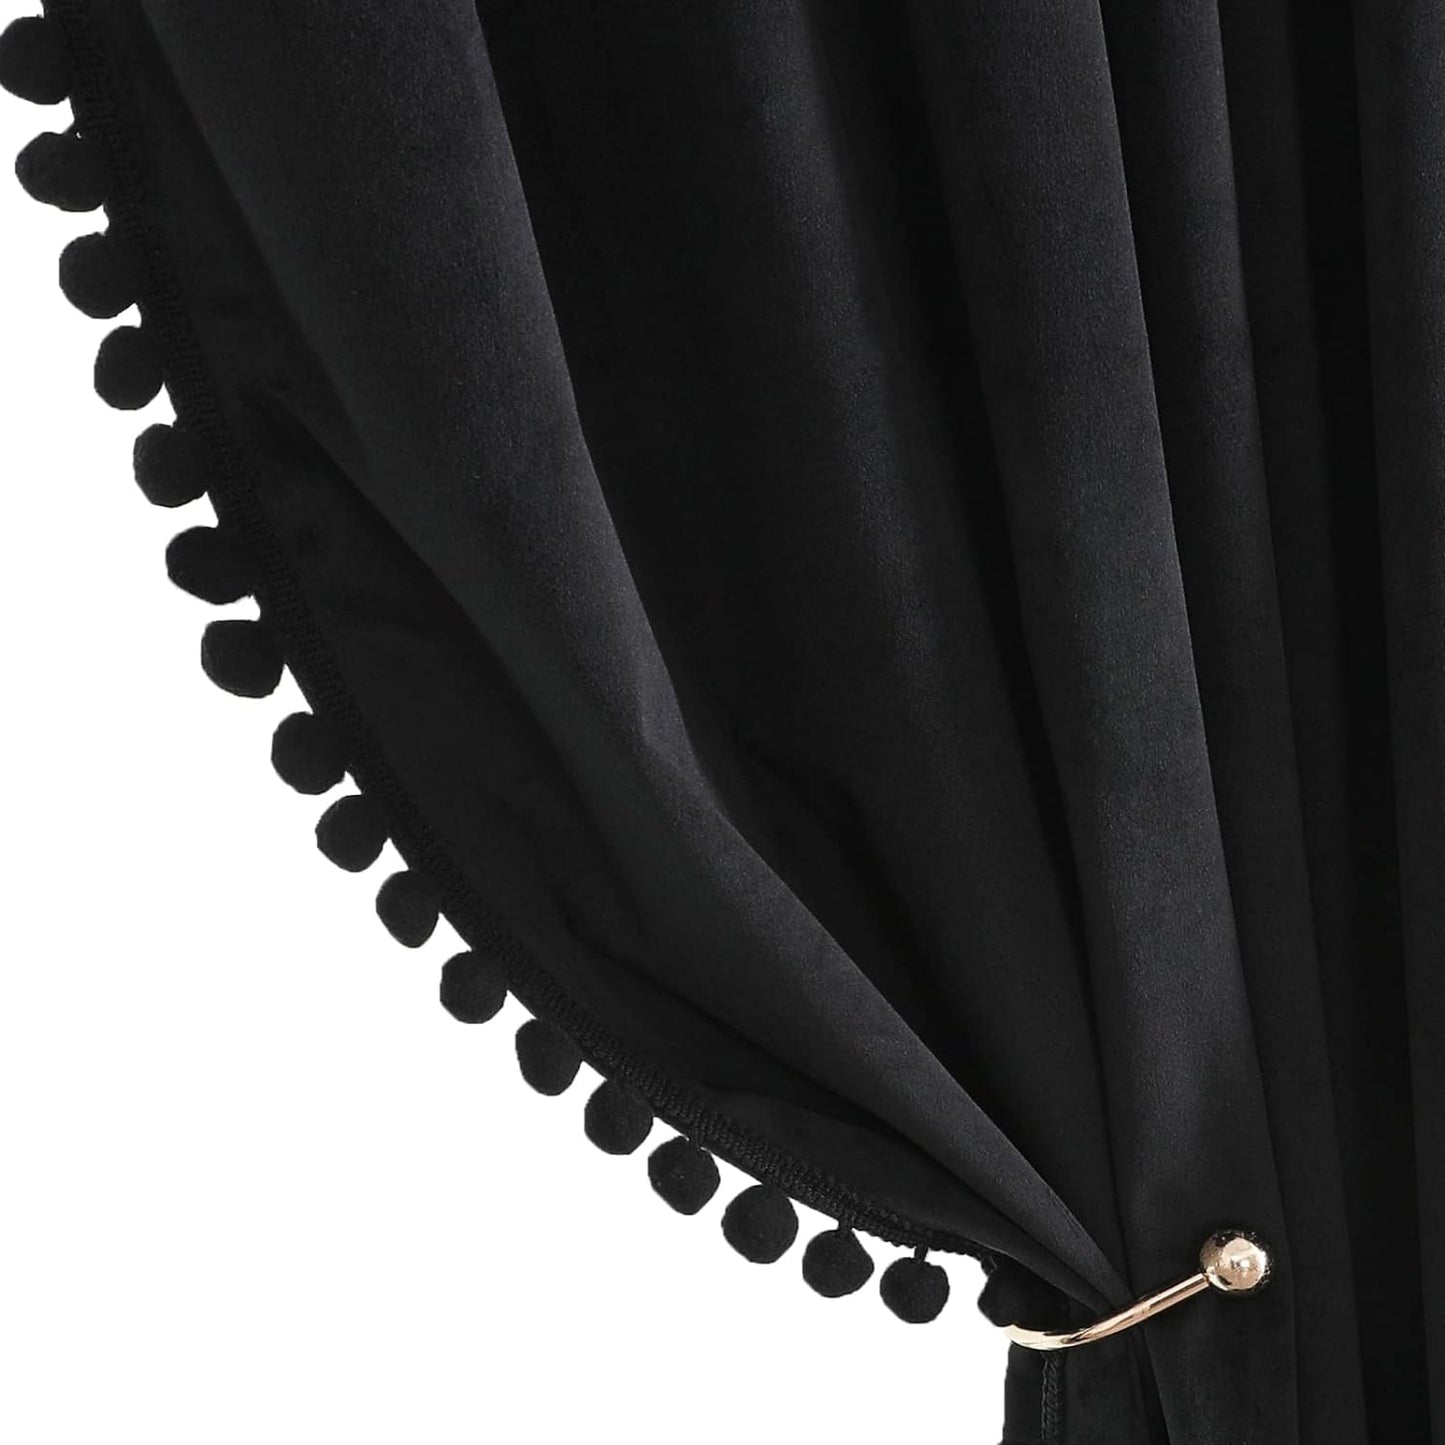 Benedeco Green Velvet Curtains for Bedroom Window, Super Soft Luxury Drapes, Room Darkening Thermal Insulated Rod Pocket Curtain for Living Room, W52 by L84 Inches, 2 Panels  Benedeco A-Black W52 * L108 | 2 Panels 